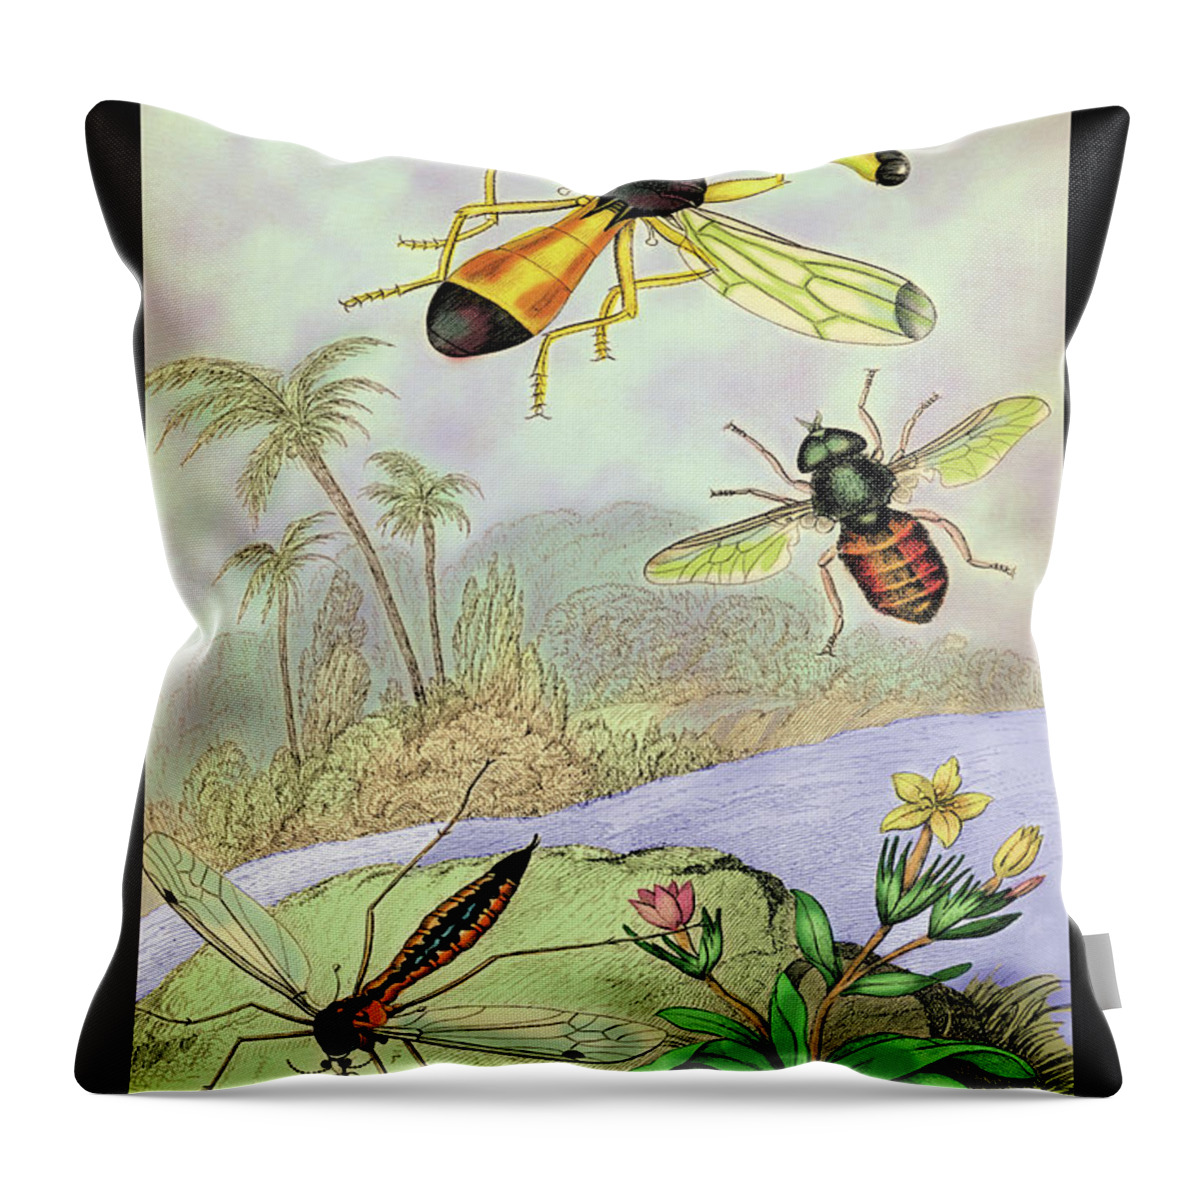 Mosquito Throw Pillow featuring the painting Insects: Ctenophora Pectinicornis, Tabanus Tropicus, et al. by James Duncan